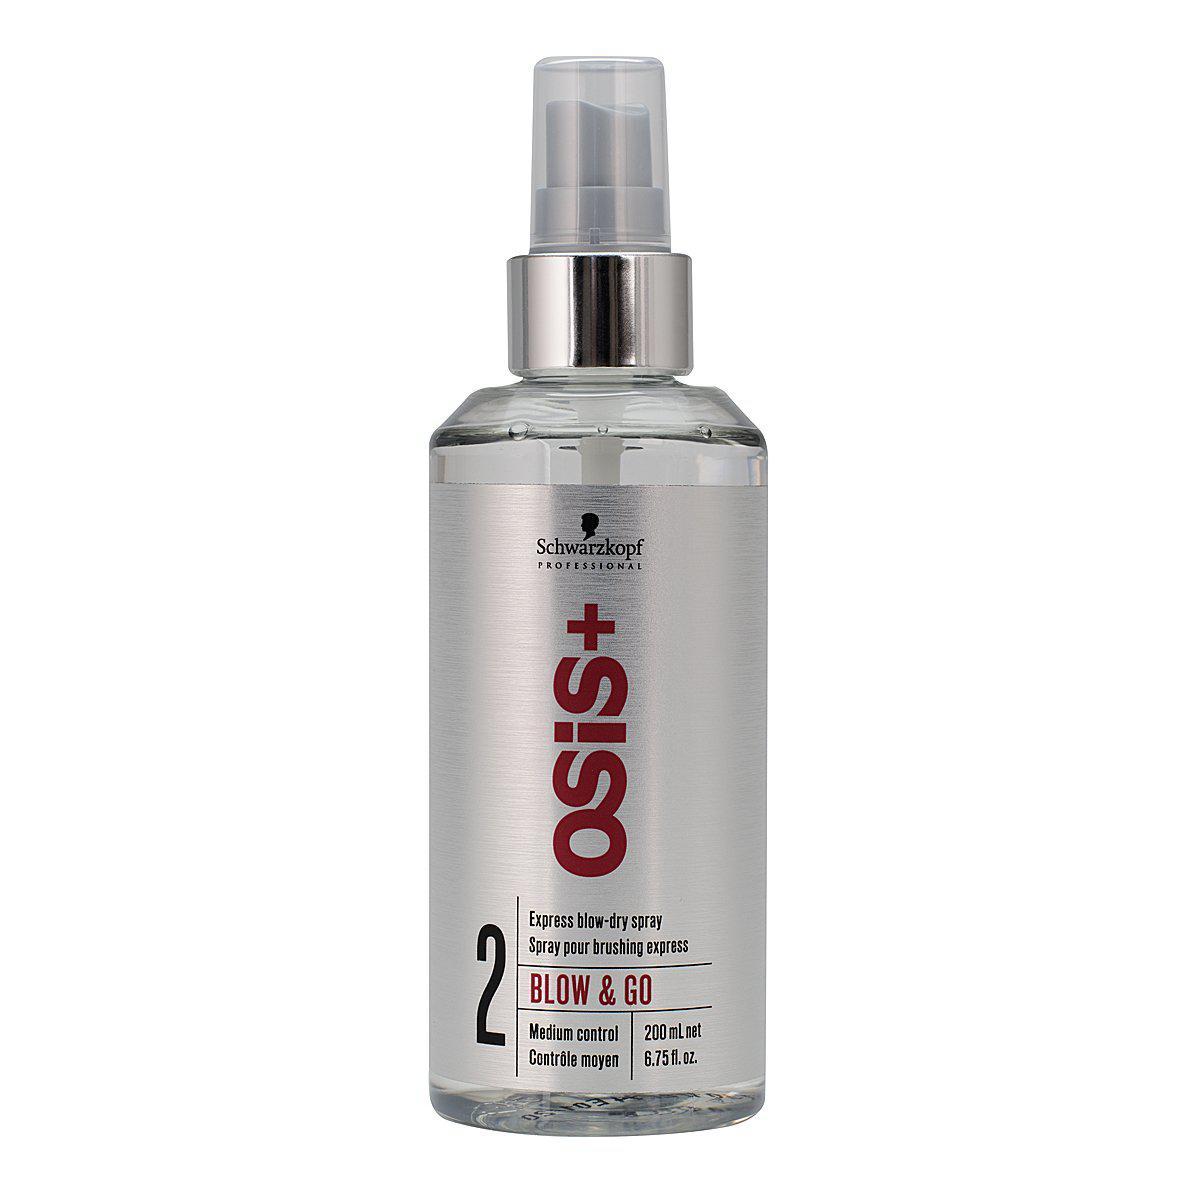 OSIS Blow & Go 200ml